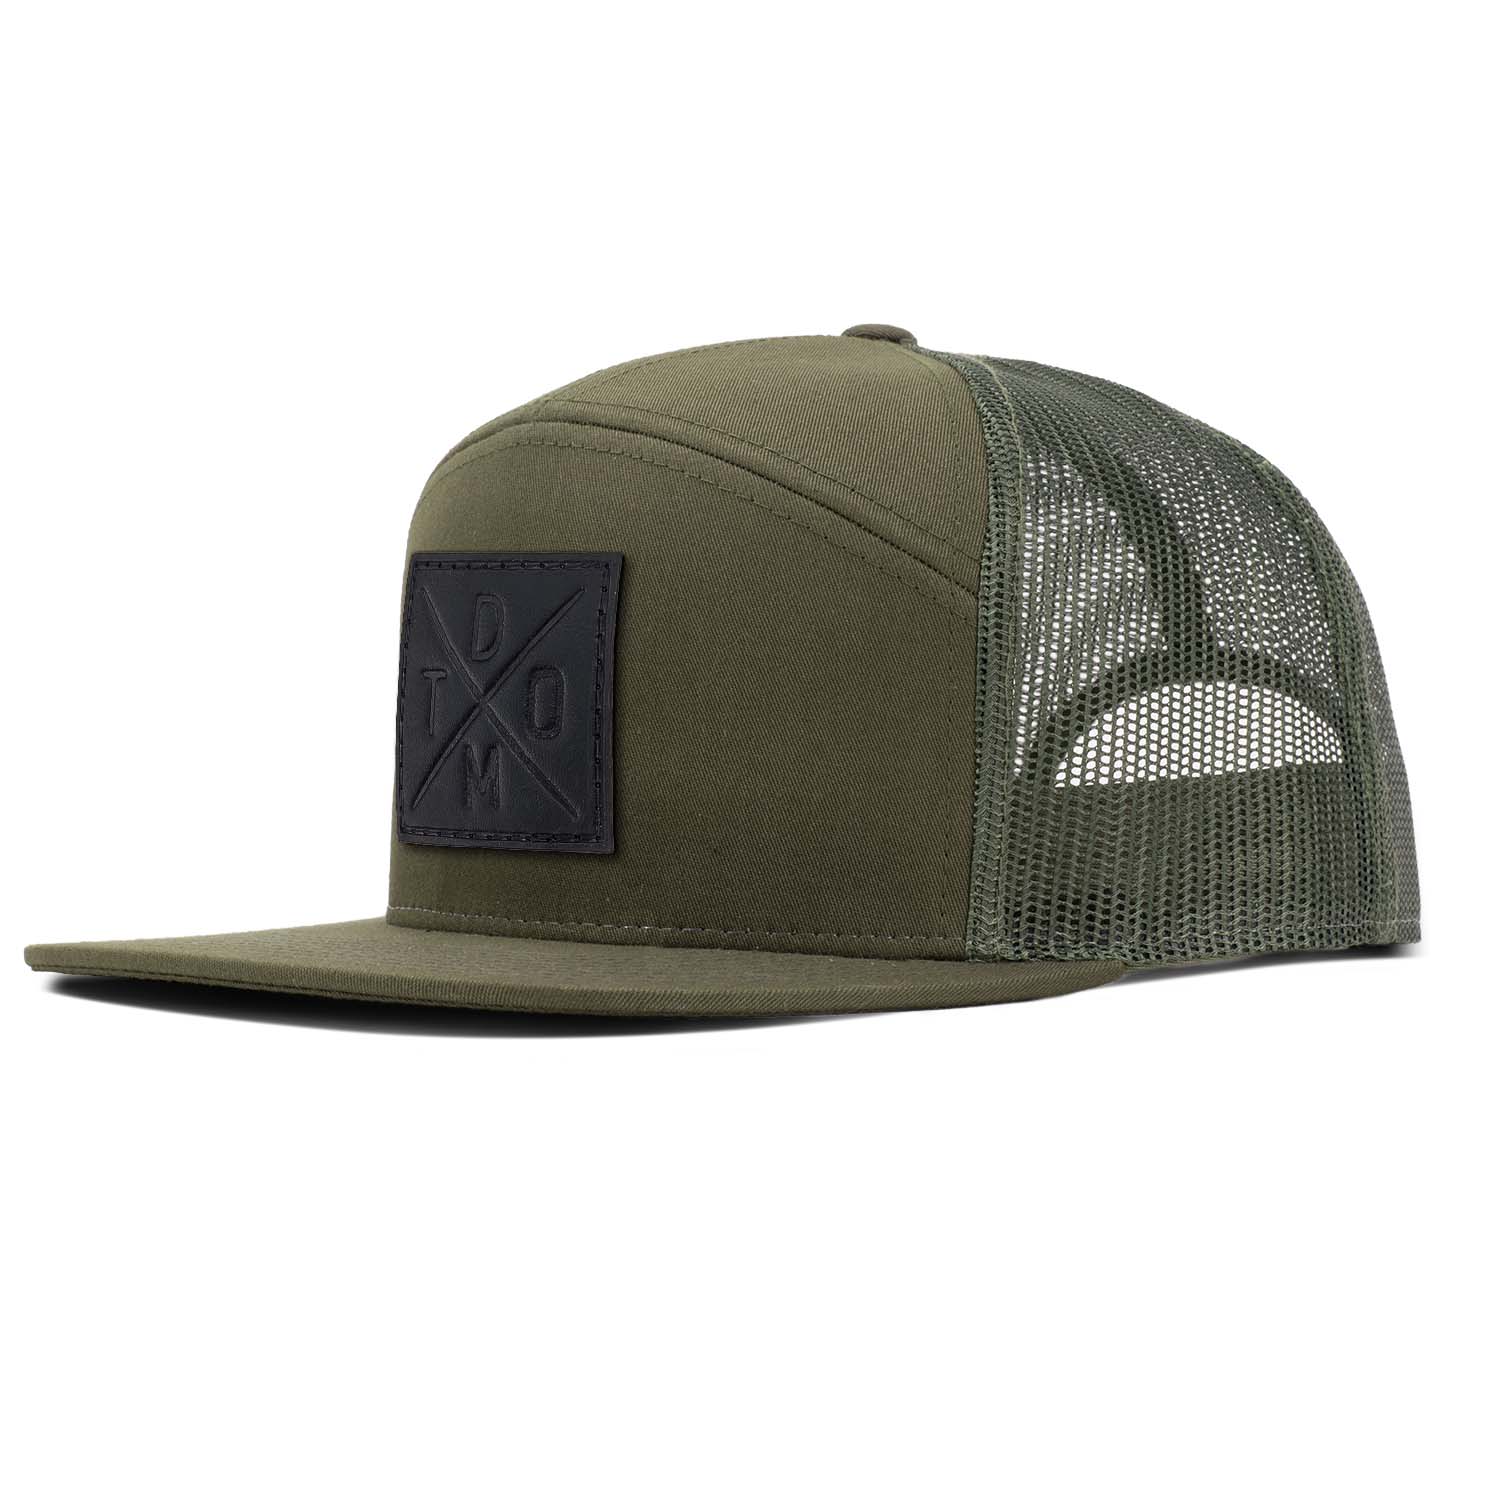 Revolution Mfg dark loden with loden mesh 7 panel trucker featuring our black DTOM debossed full grain leather patch.